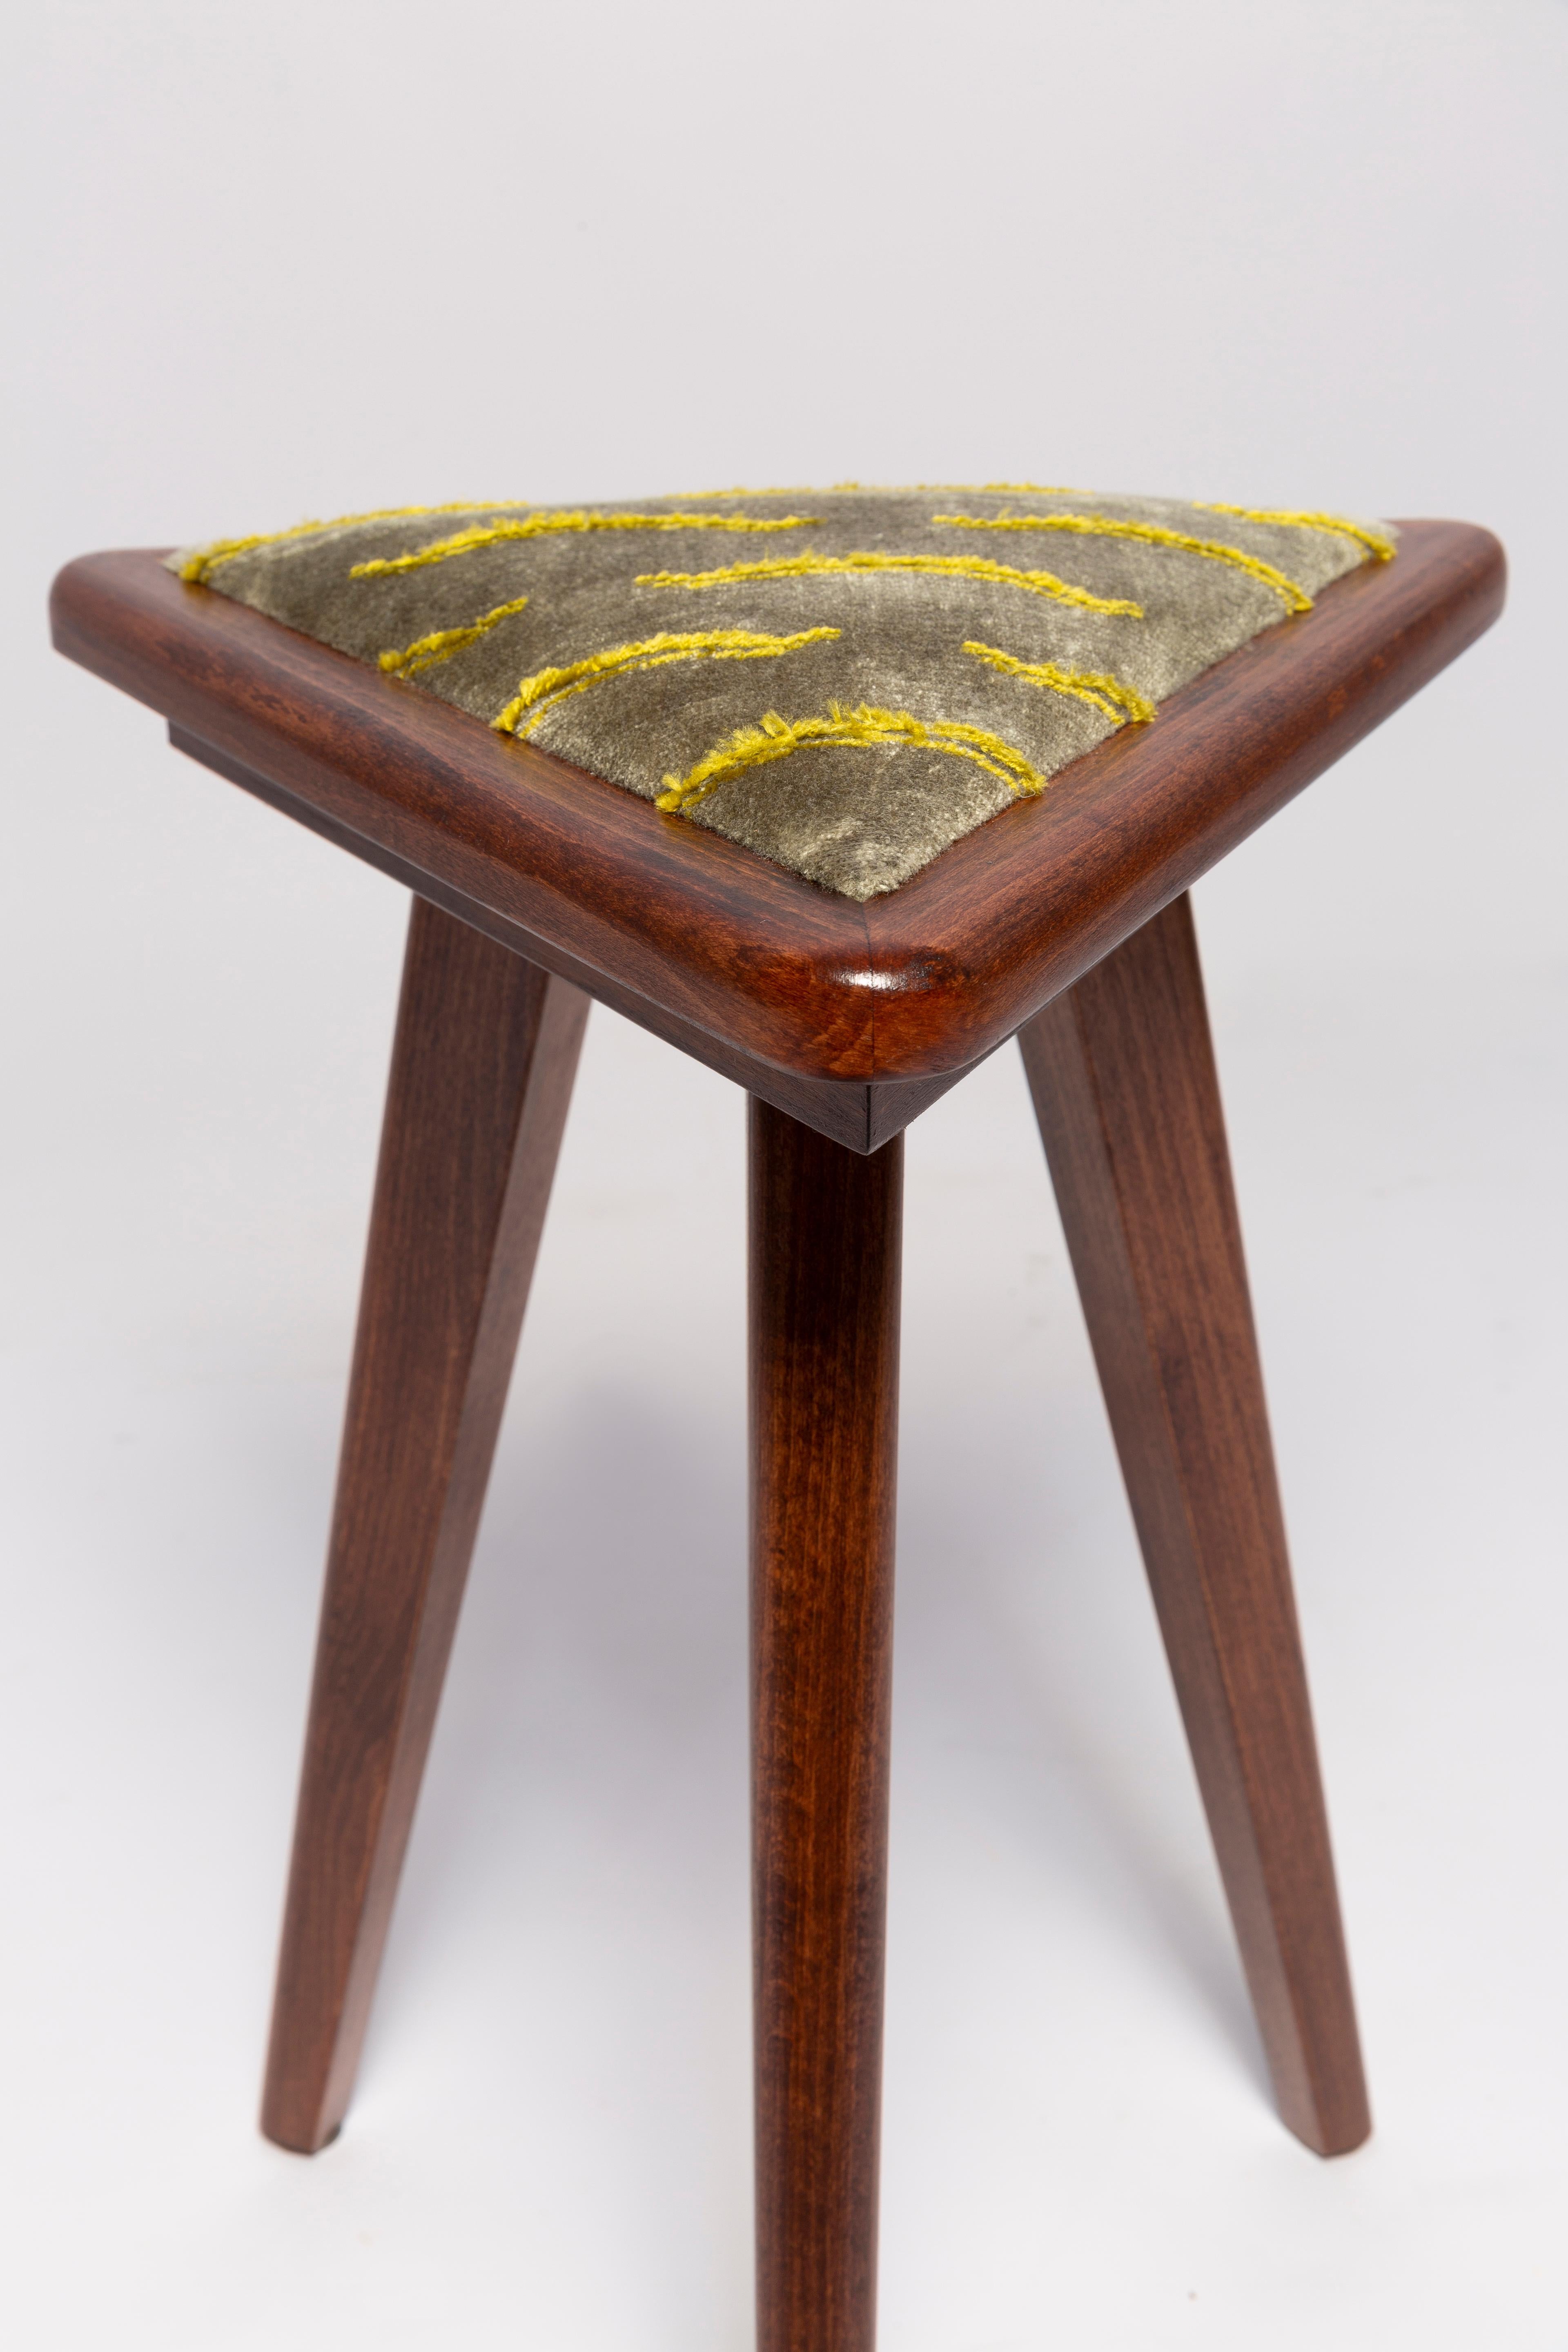 Hand-Painted Mid Century Style Triangle Stool in Nouvelles Vagues, by Vintola Studio, Europe For Sale